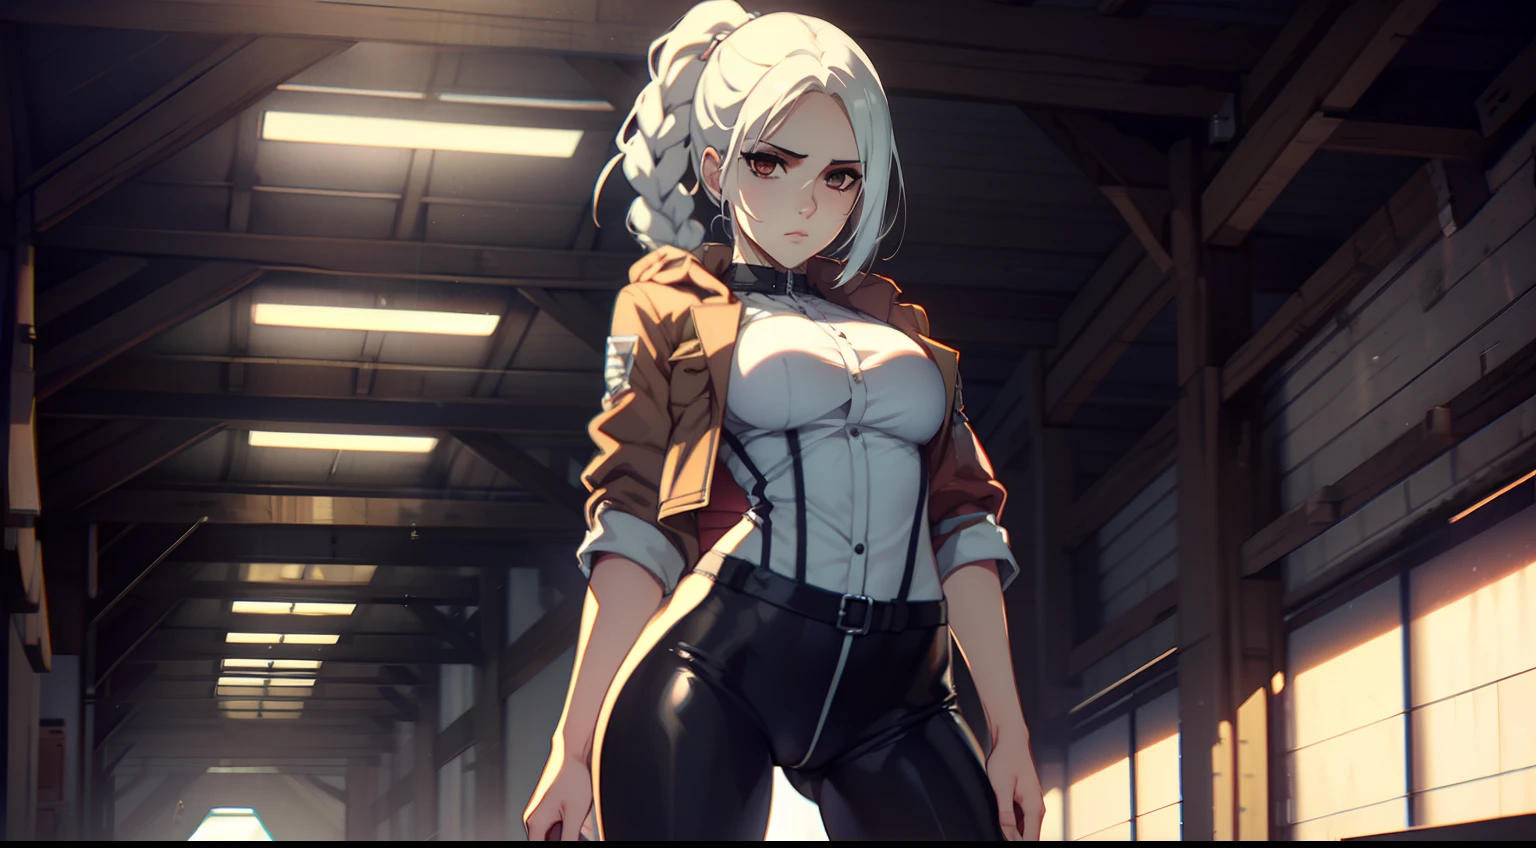 photo portrait, Beautiful figure, Lucy from the anime series Cyberpunk Edge Runner, Erotica, Nudie, half naked, a 1girl, facing the viewer, Beautiful figure (Proper Anatopy 1.1.), in full height (Body Full 1.1), Slim, Slender figure, Slender figure, shapely legs, leather pants, Anime style, white colored hair, white colored hair, that disappear at the ends, Bob hairstyle, short white jacket, tight black suit, Cutouts on the shoulders, Cutouts on the chest, Skinny black leather pants, Very detailed face, Very beautiful face, Very sexy ass, in full height (Body Full 1.1), Tall android girl, small elastic breasts, Little ass, Hair is gathered in a braid, Beautiful slim figure, small buttocks, A braid around the head, Round braid, Red Star in the Forehead, Short Brown Jacket, black tight suit, darkly，gris & Dark Style：1.1), Light, femininity，tmasterpiece，beste-Qualit，higly detailed，Visible to the feet， 8K resolution， High Sharp， 8K resolution， higly detailed， 8K UHD， Professional lighting， Photon mapping，physical based rendering， a perfect face， detailed face and body， ray traced， expressive look， Cinmatic Lighting，elastic small breasts, Heightened sexuality，